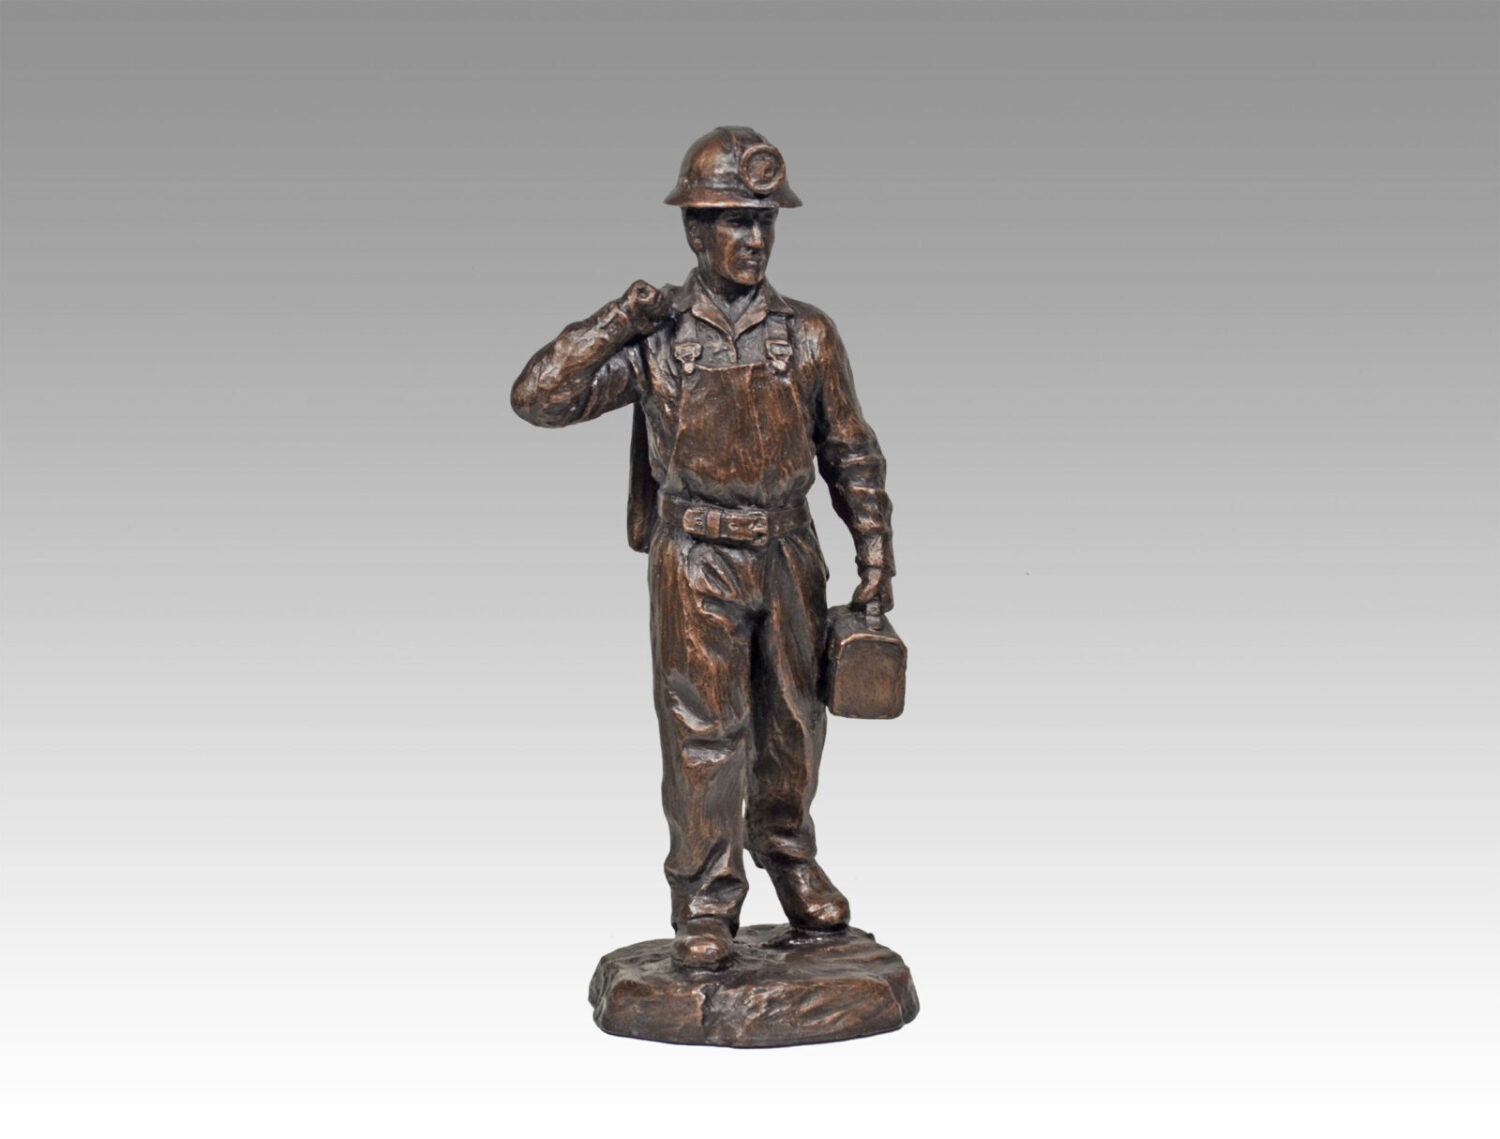 Gallery, Hardrock Worker, $250 CAD, Metal Infused, 14" H, Edition 80, Mining Sculpture of a miner coming off shift, Sculptor Tyler Fauvelle